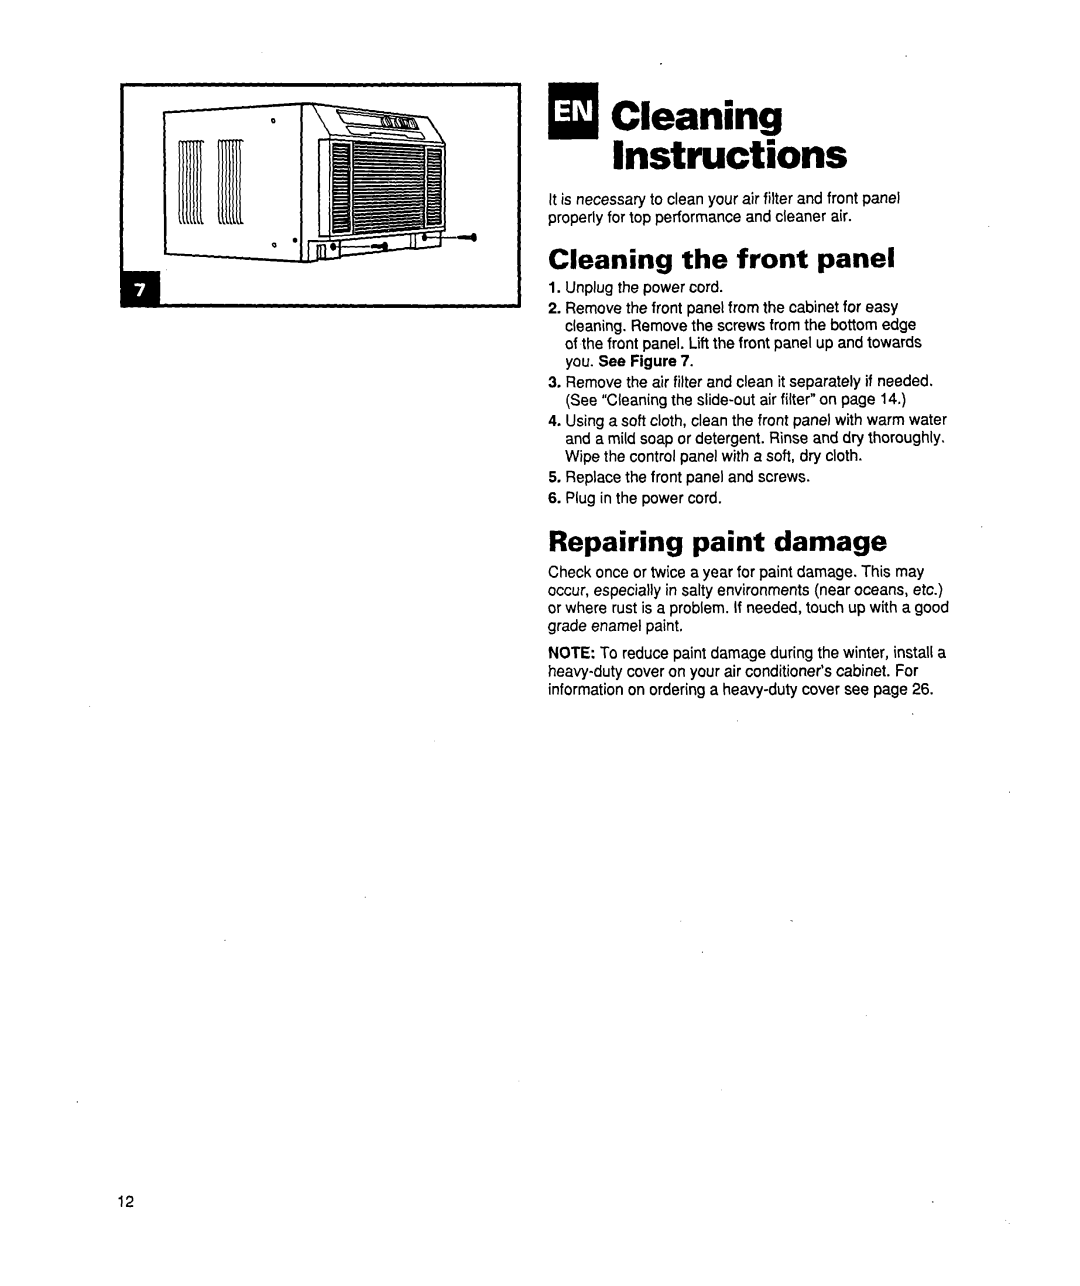 Whirlpool ACQ254XF0 manual q Cleaning Instructions, Cleaning the front panel, Repairing paint damage 